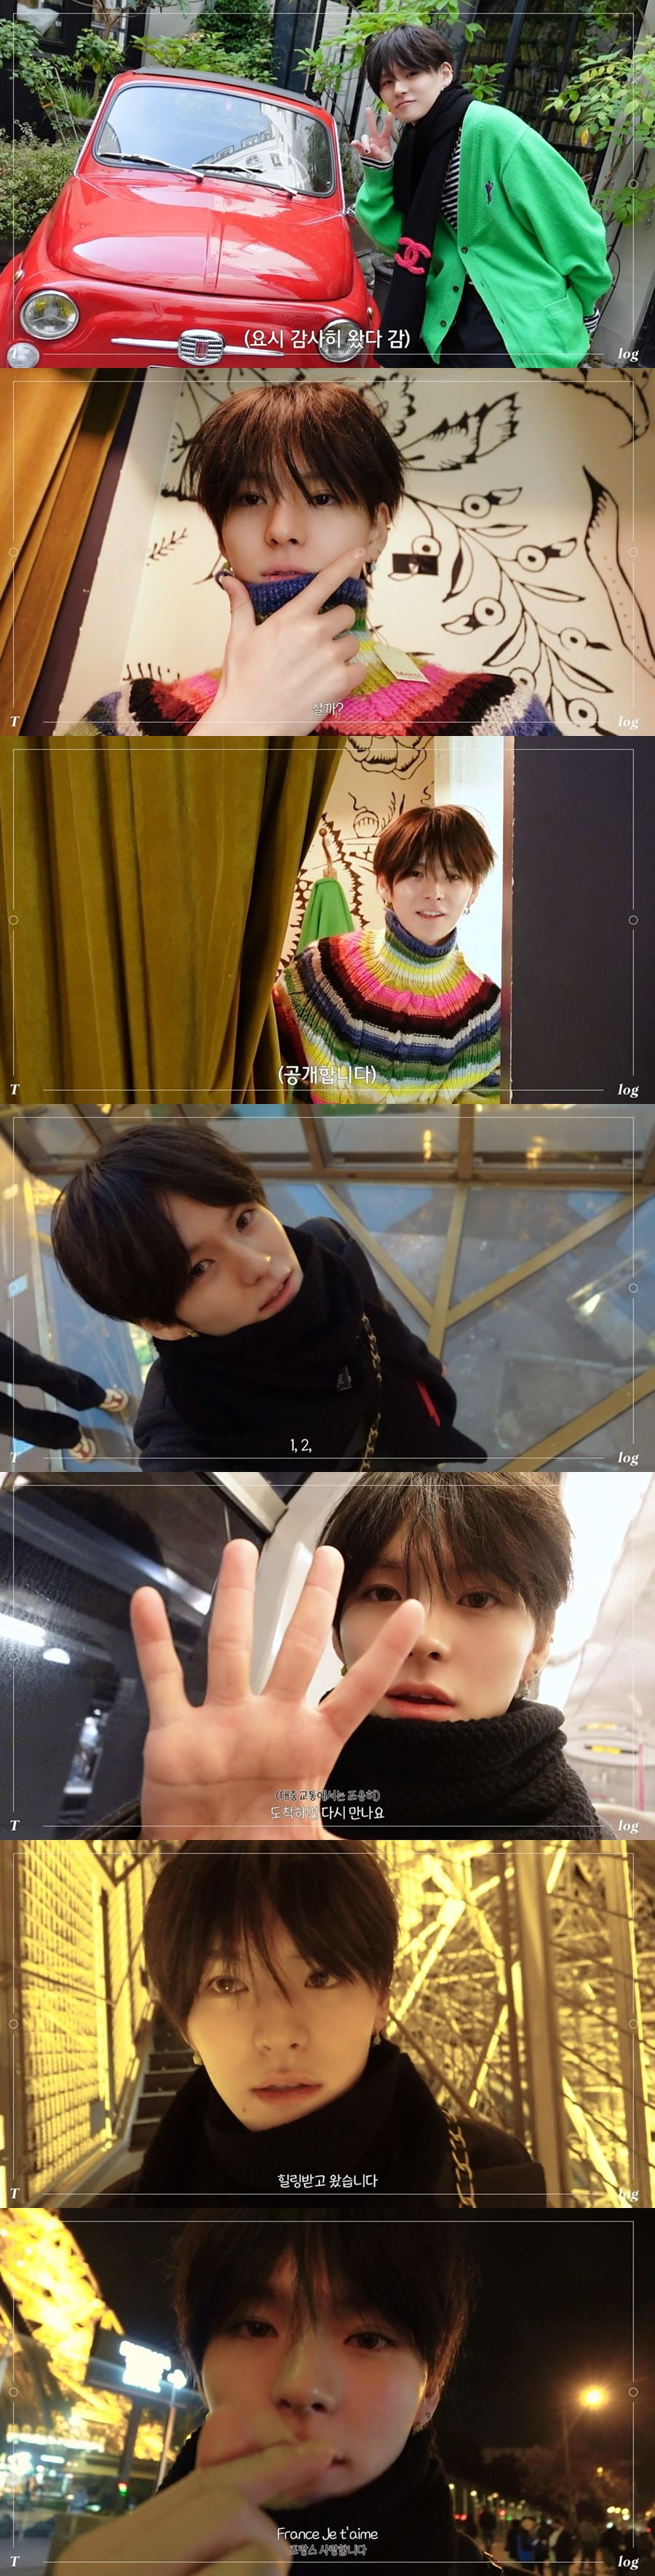 YG Treasure Yoshi's healing travel story in Paris, France, overflowing with 'fan love'